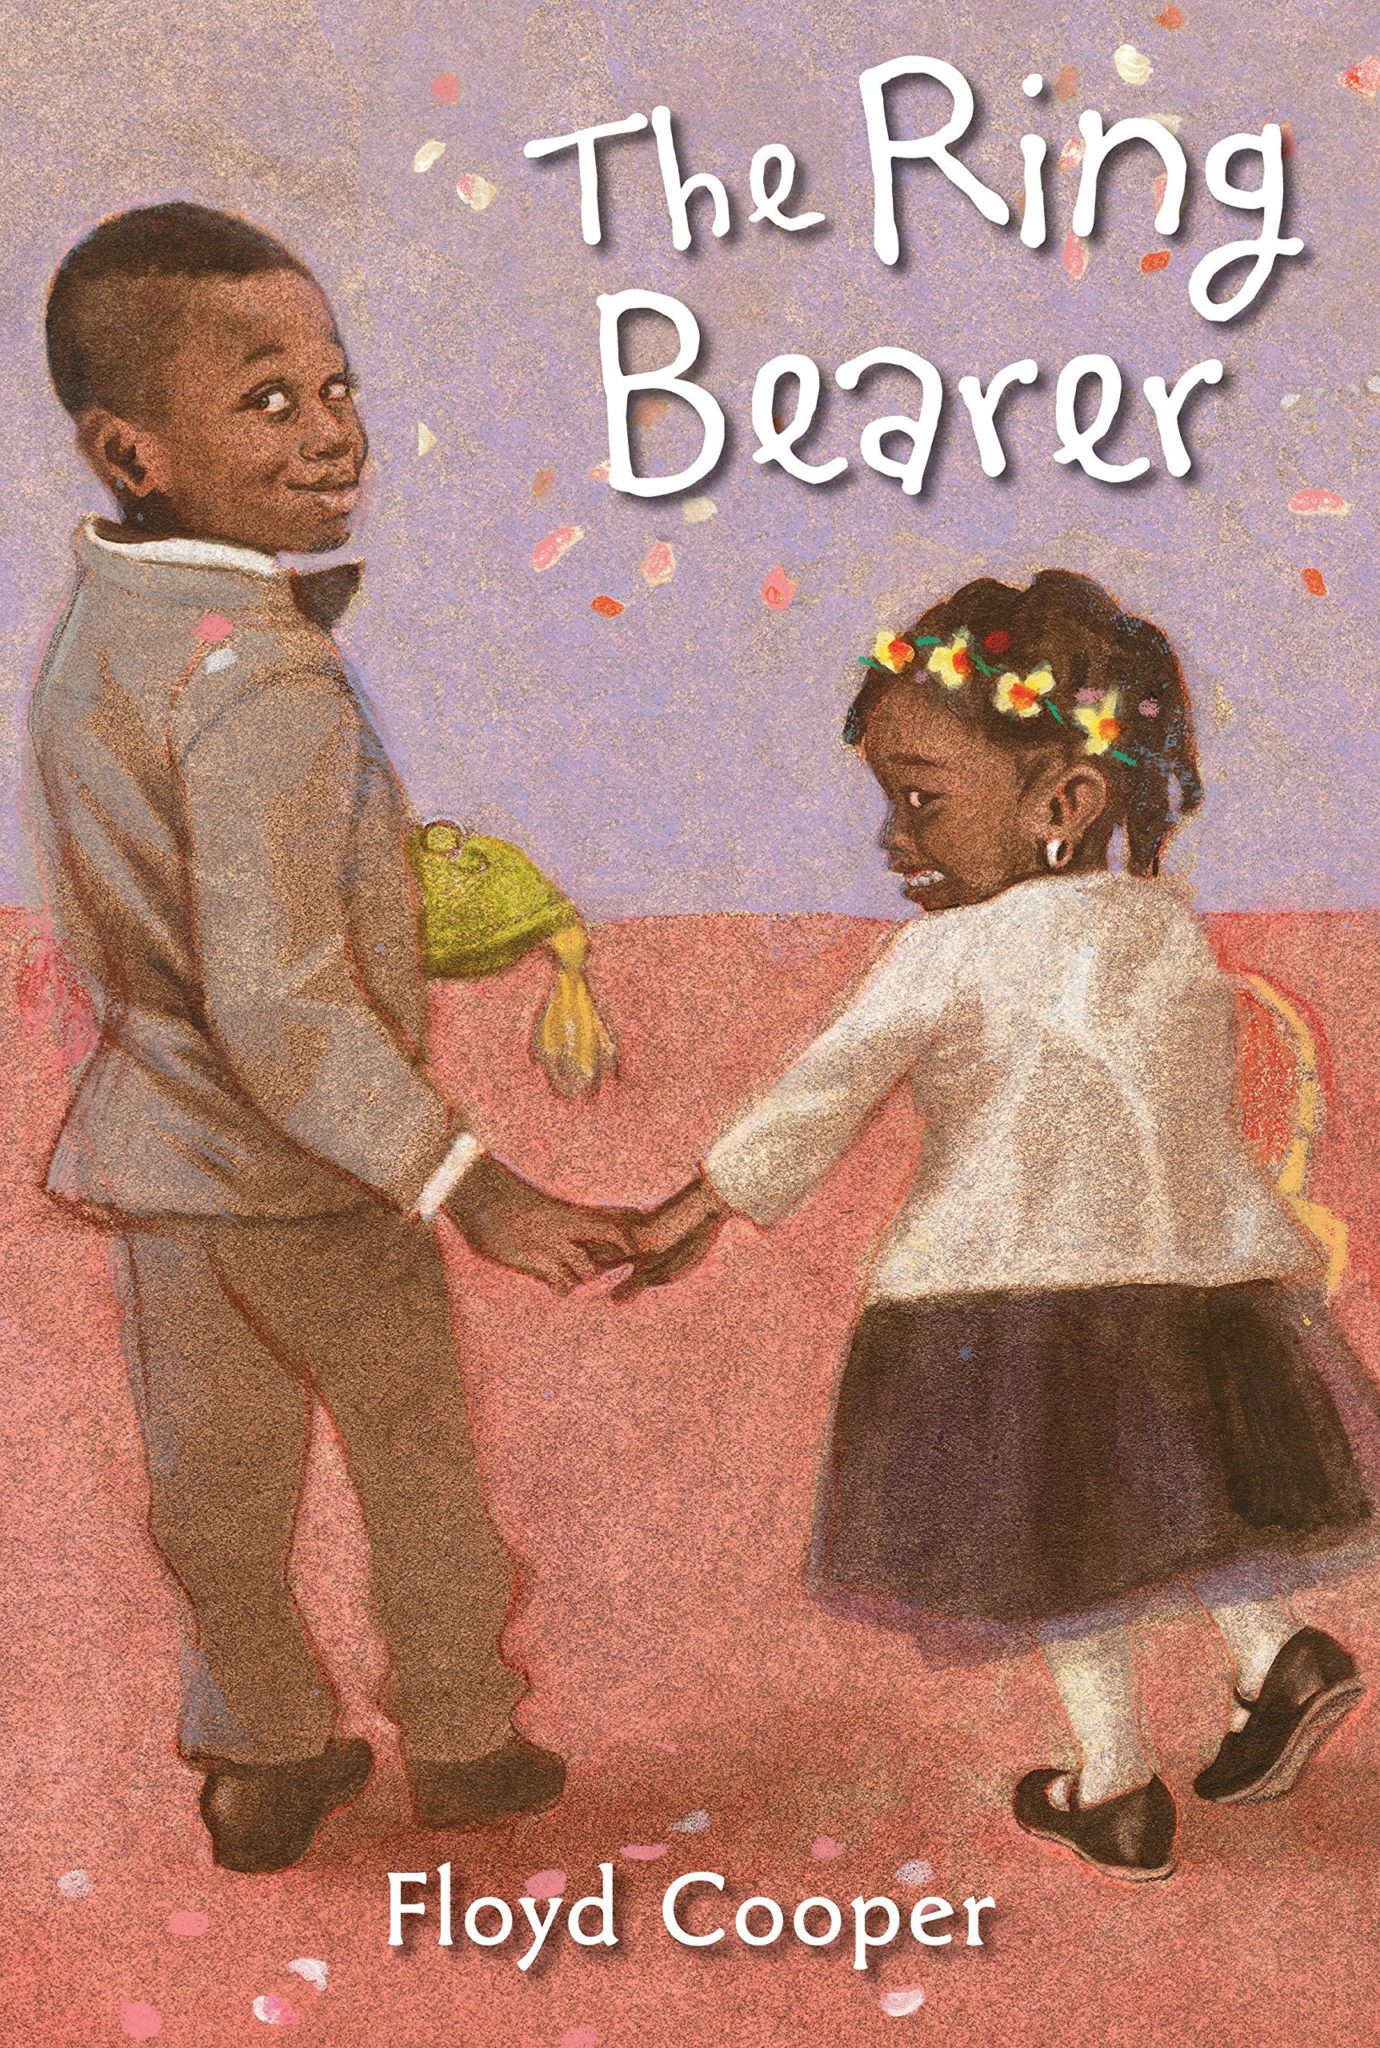 The cover of the book "The Ring Bearer" features two Black children walking down the aisle at a wedding. The boy on the left is the ring bearer and looks back at the viewer with a smile, while the girl on the right is the flower girl and looks back with an anxious expression. 